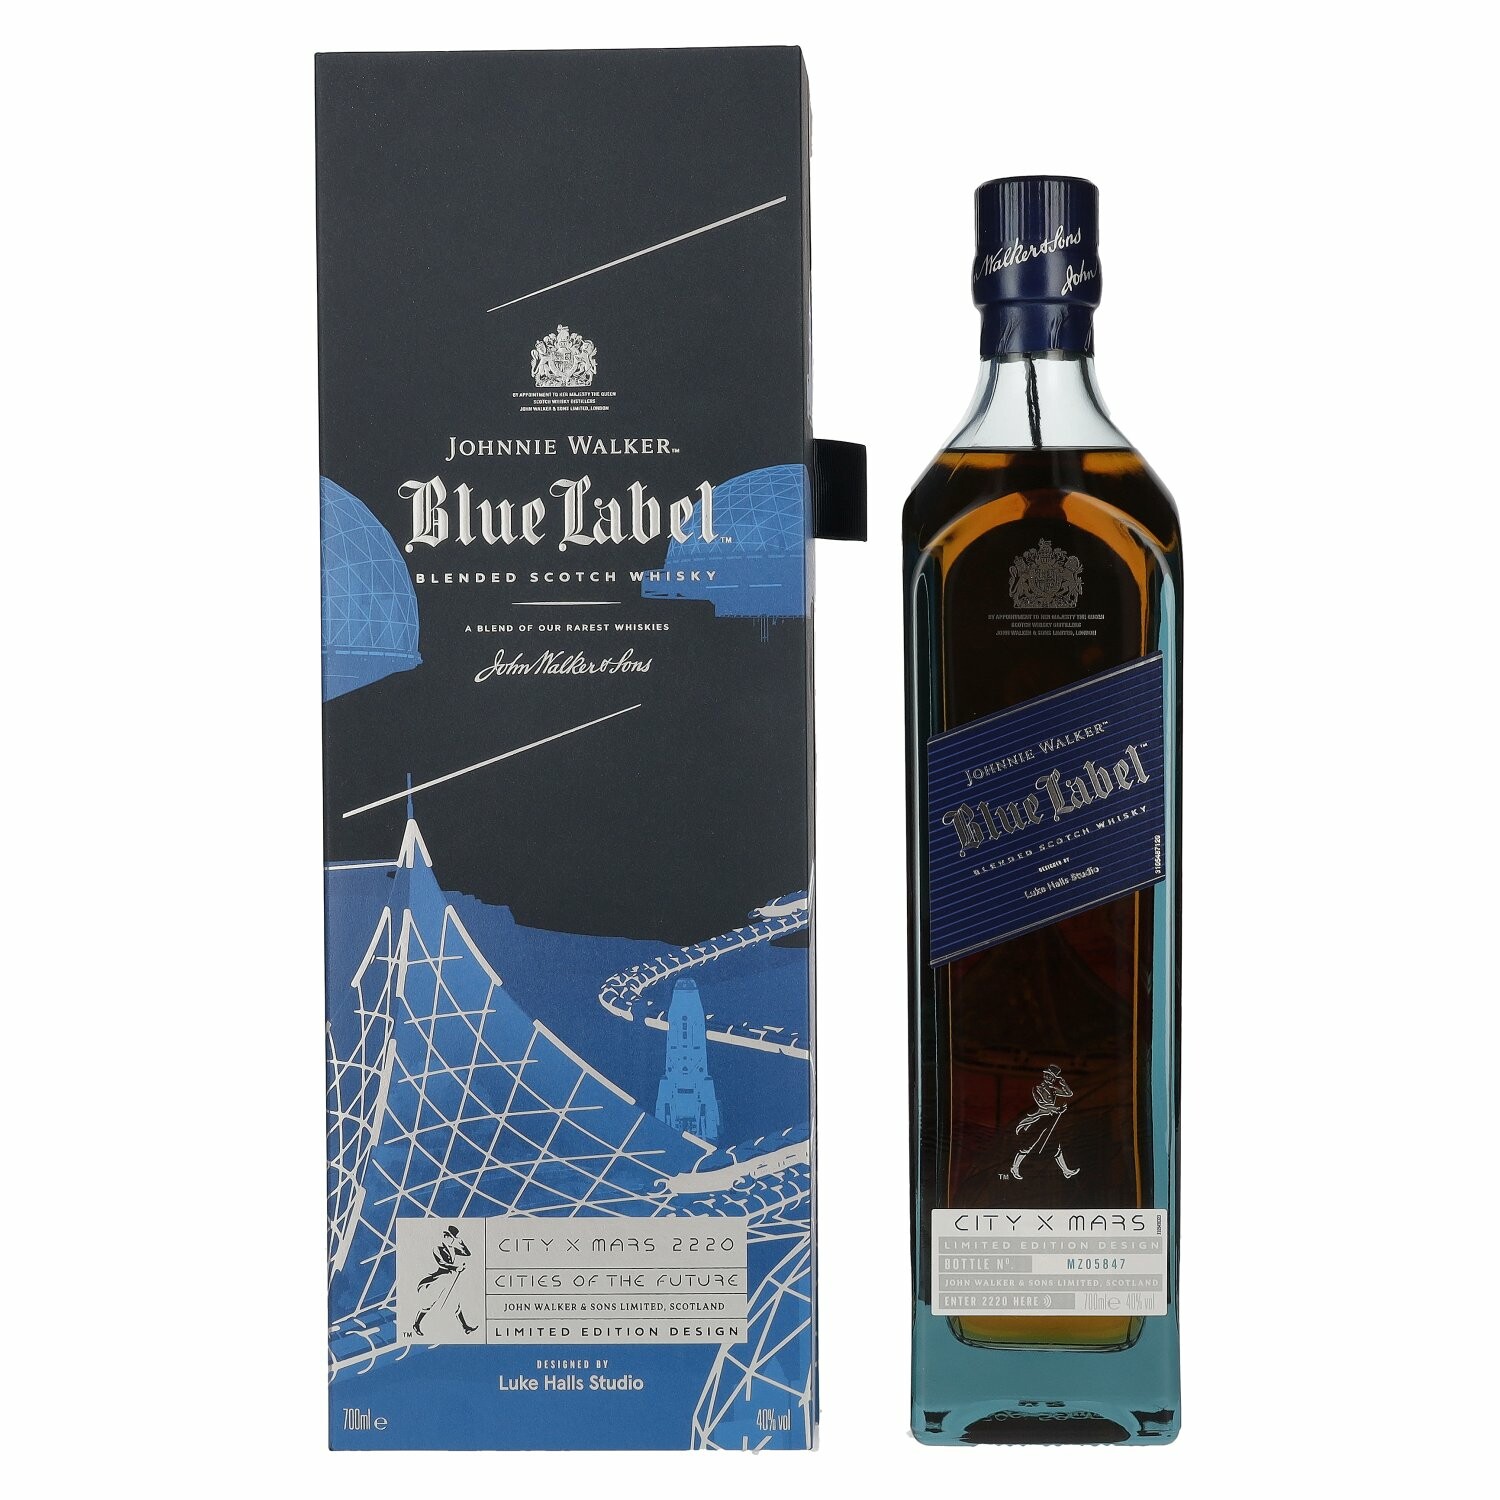 Johnnie Walker Blue Label City Edition Mars Blended Scotch Whisky 40% Vol. 0,7l in Giftbox